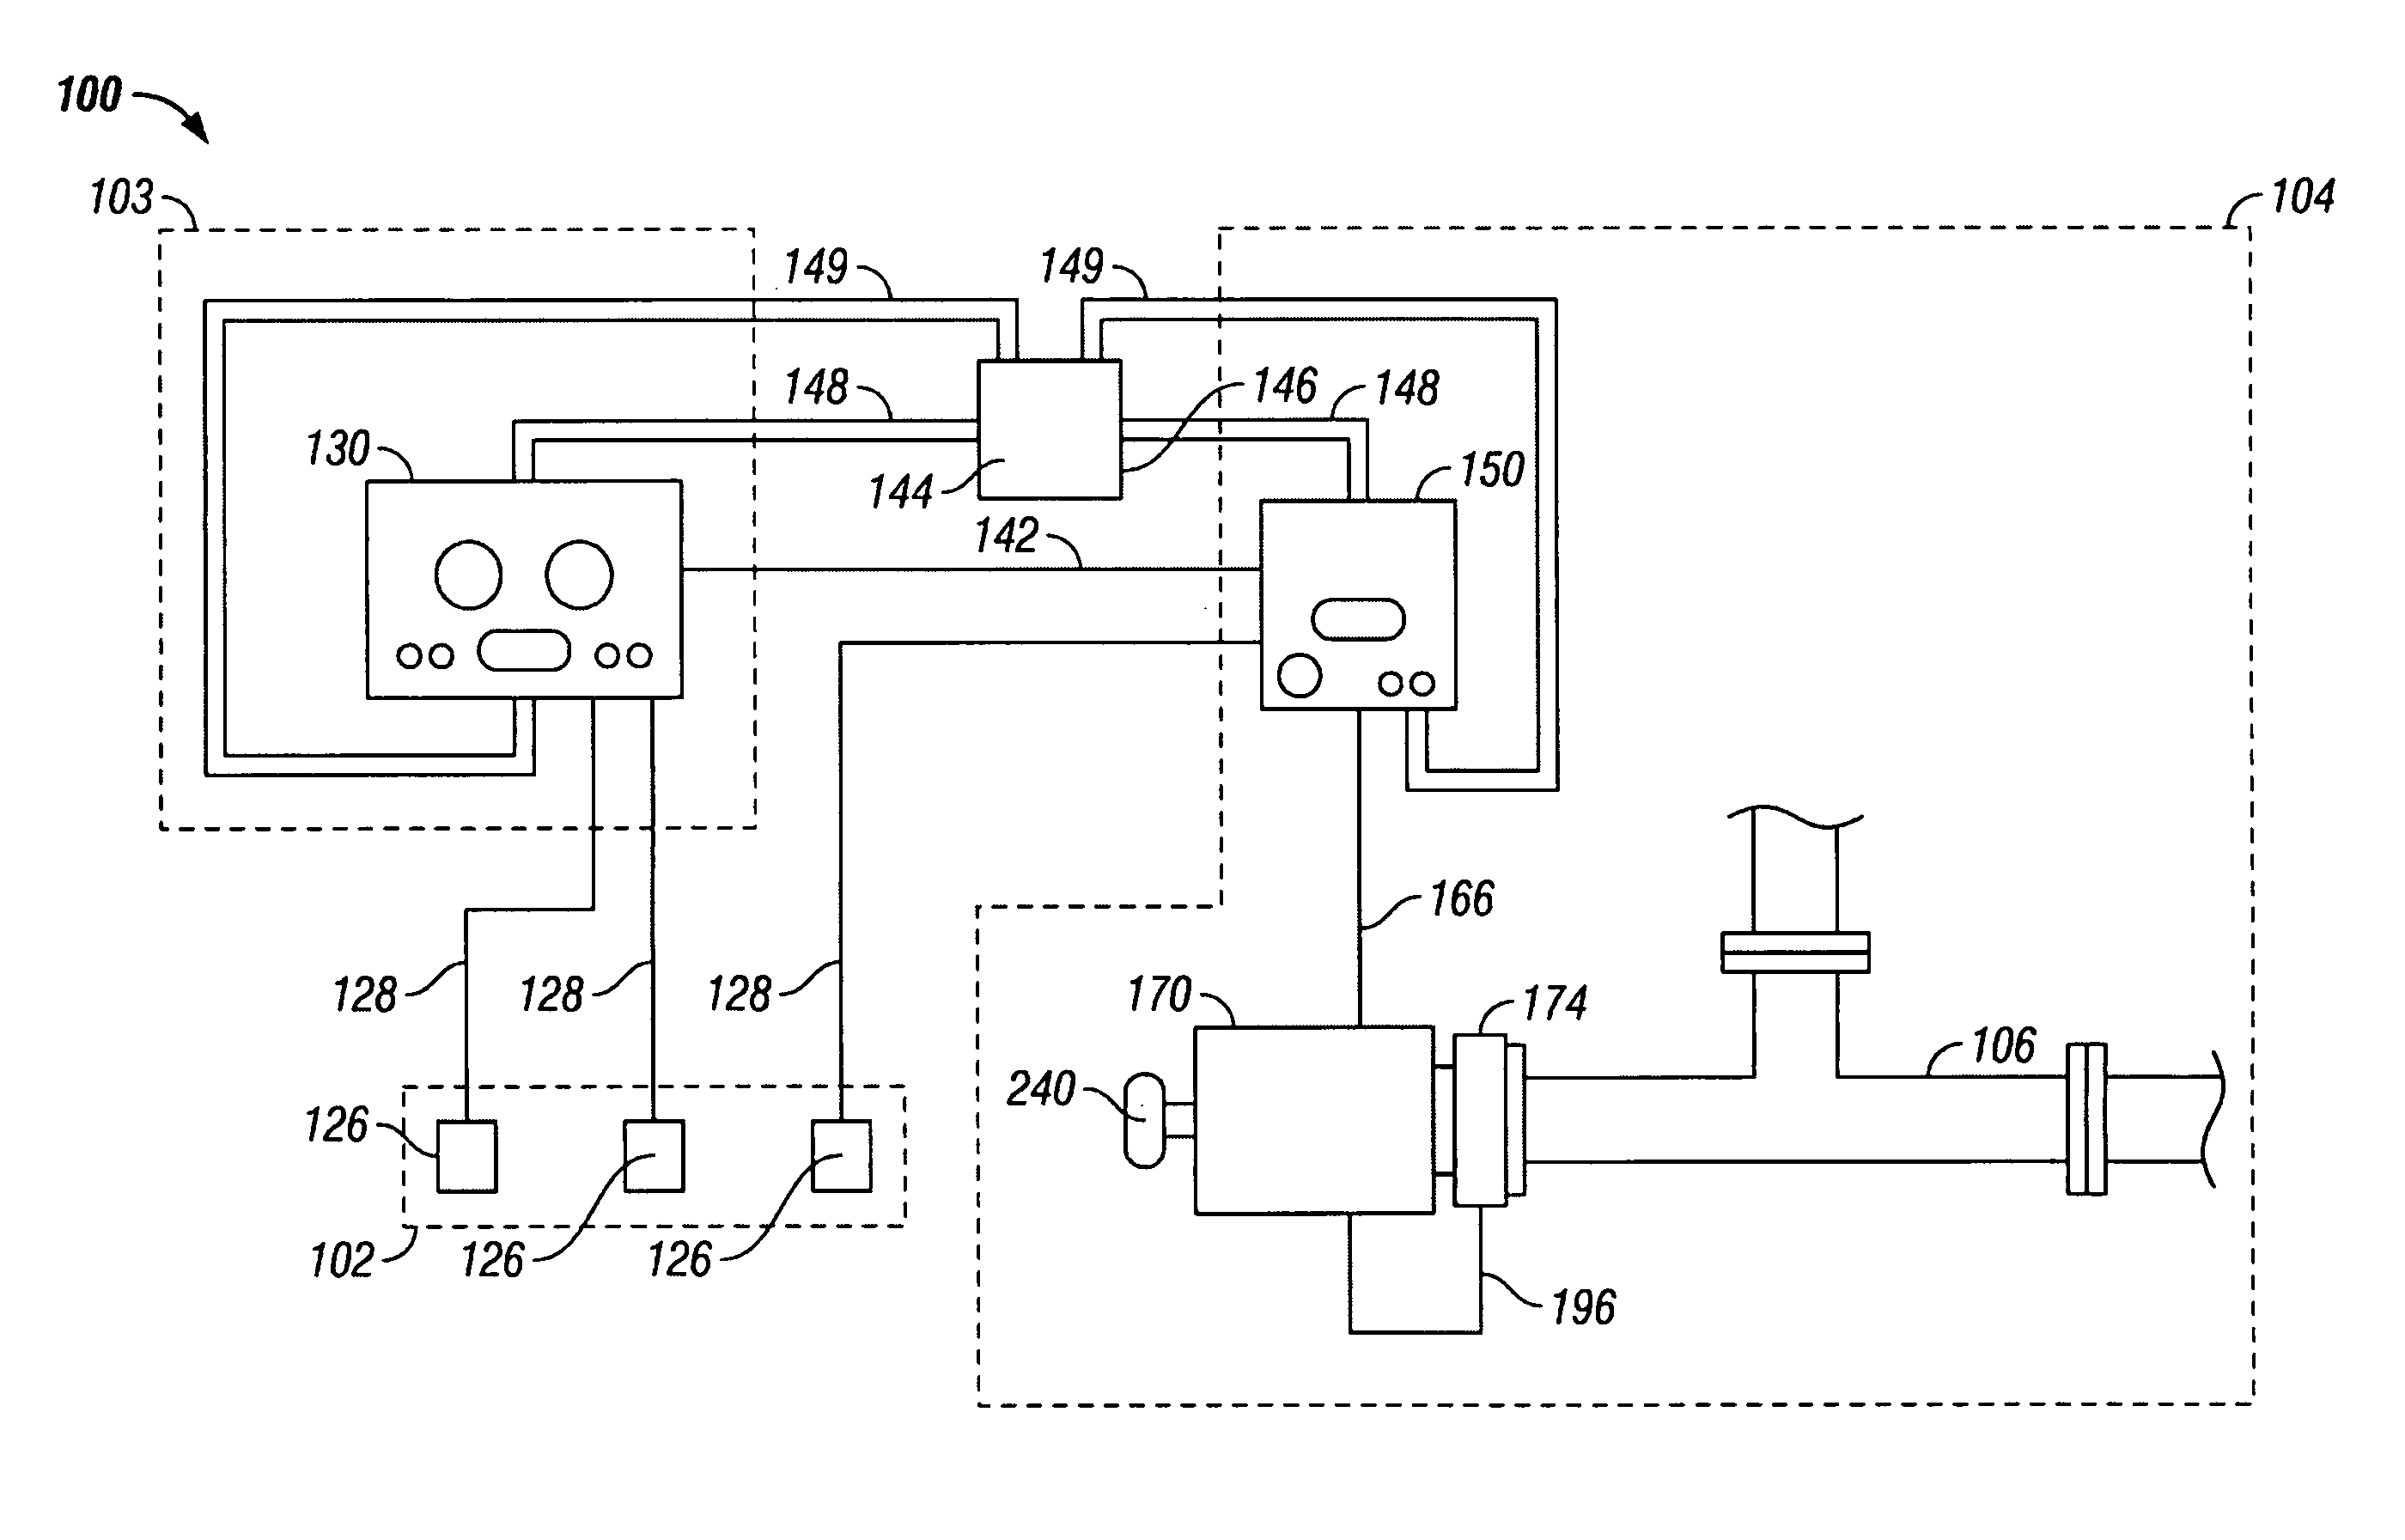 Apparatus for controlling a pressure control assembly in a hazardous area